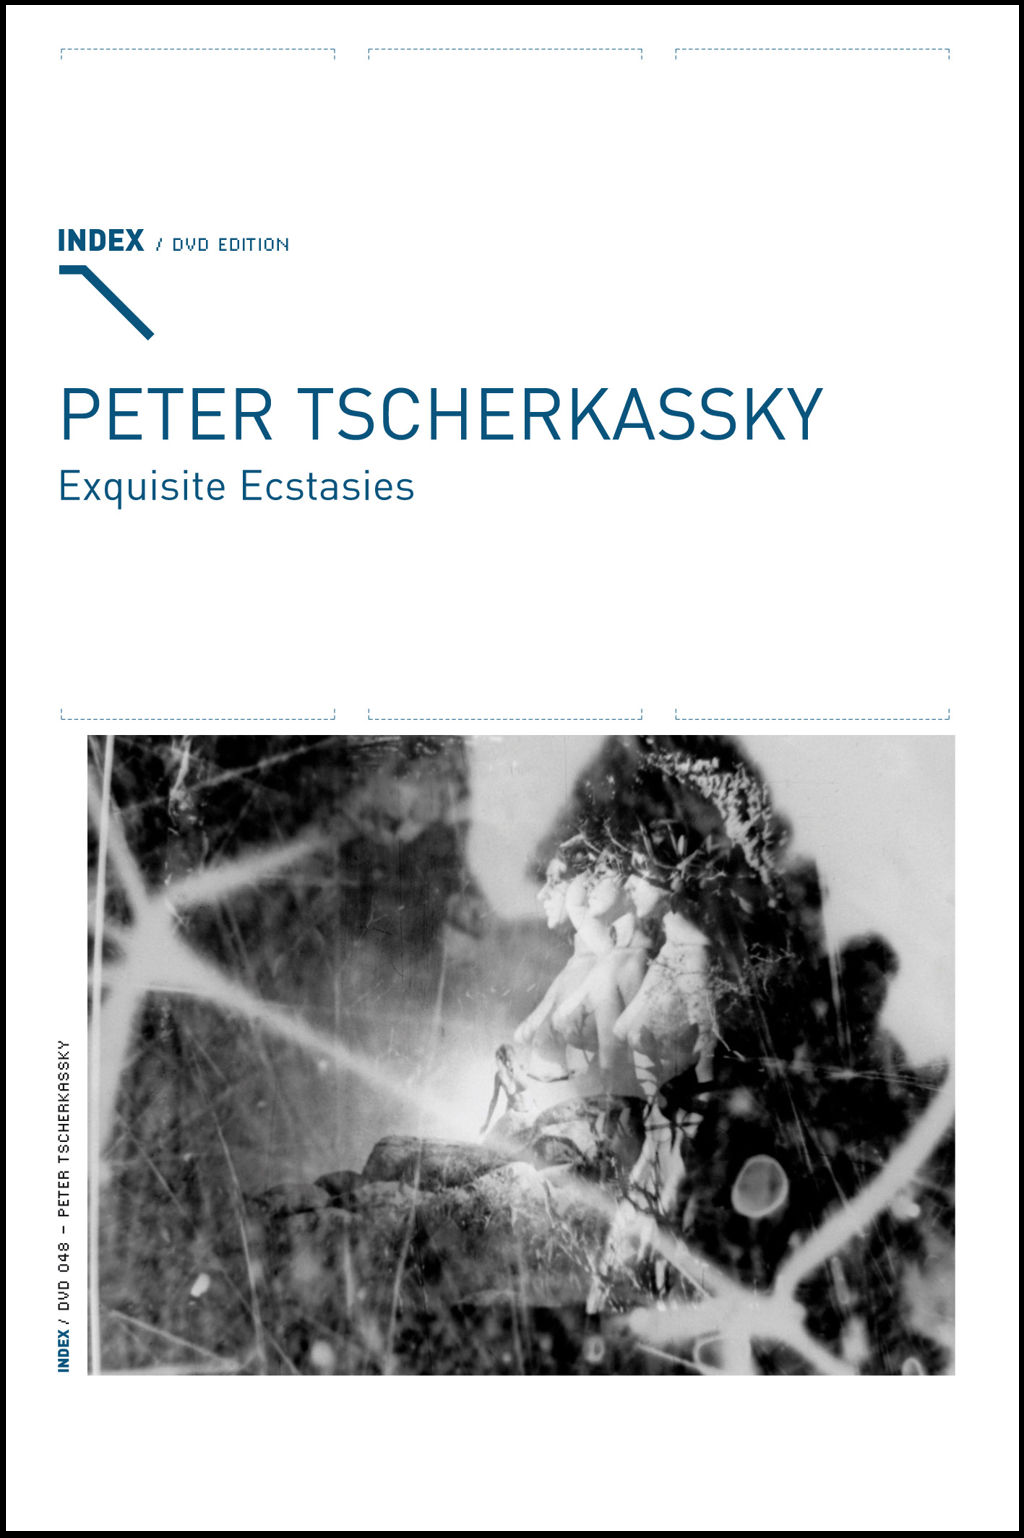 PETER TSCHERKASSKY- EXQUISITE ECSTASIES Booklet_Cover LG w border.png